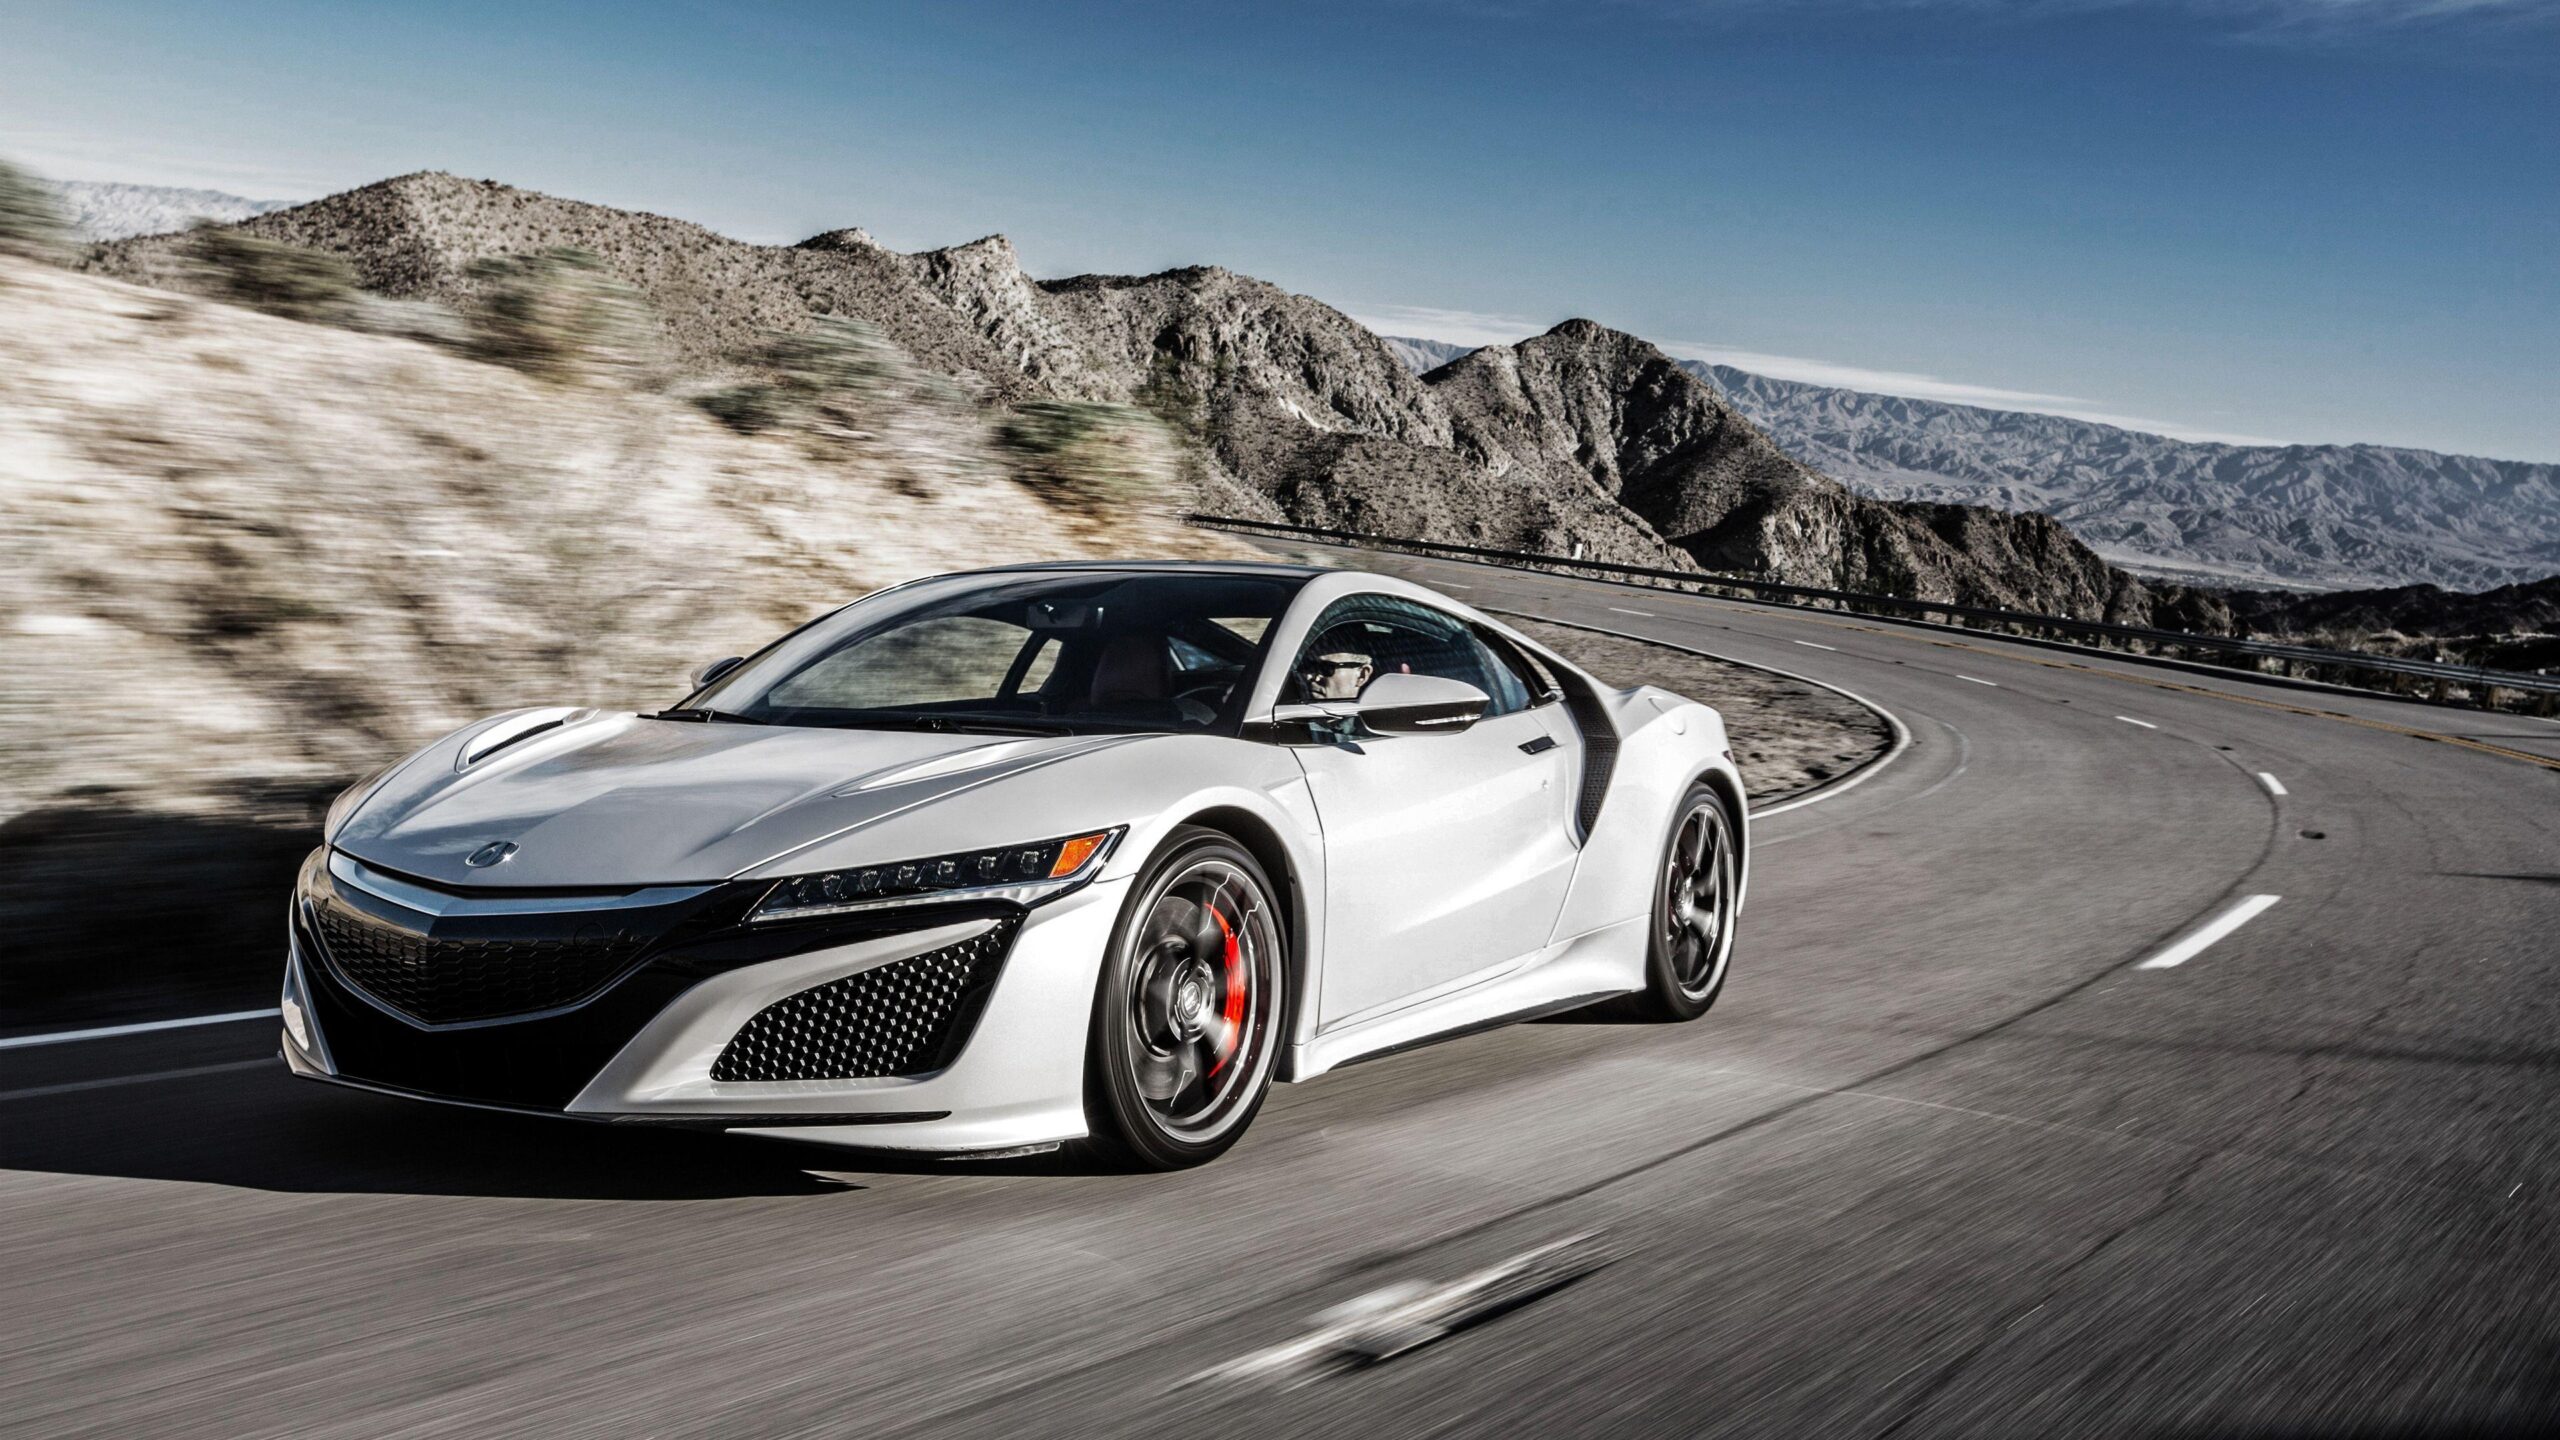 Acura NSX Best Wallpaper Hd For Pc